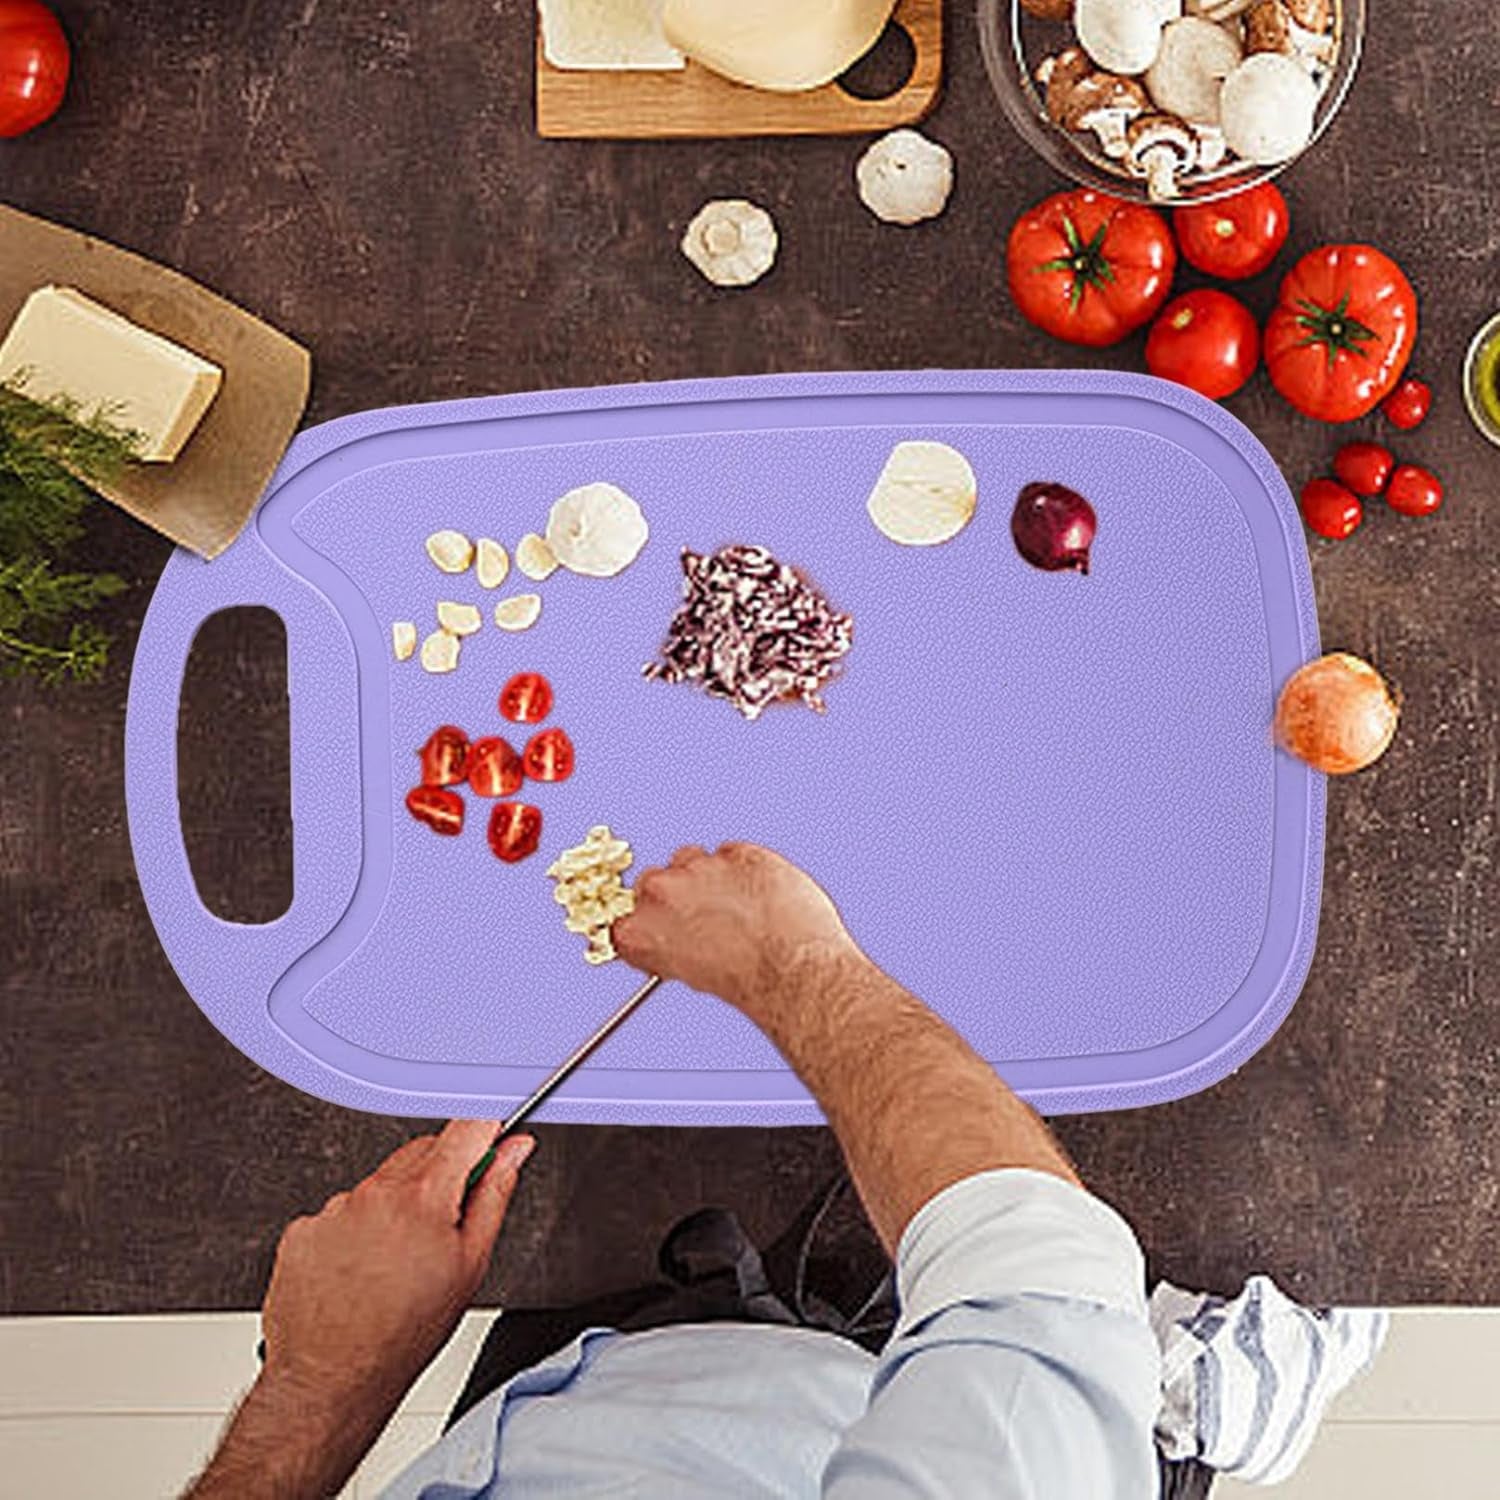 Plastic Cutting Boards for Kitchen Overstock Outlet Dishwasher Safe Double-Sided Design Meat Cutting Board Cutting Board for Meat Easy Grip Handle Non-Slip with Grinding Area Chopping Board  Deal Of The Day Prime Today Only Purple  